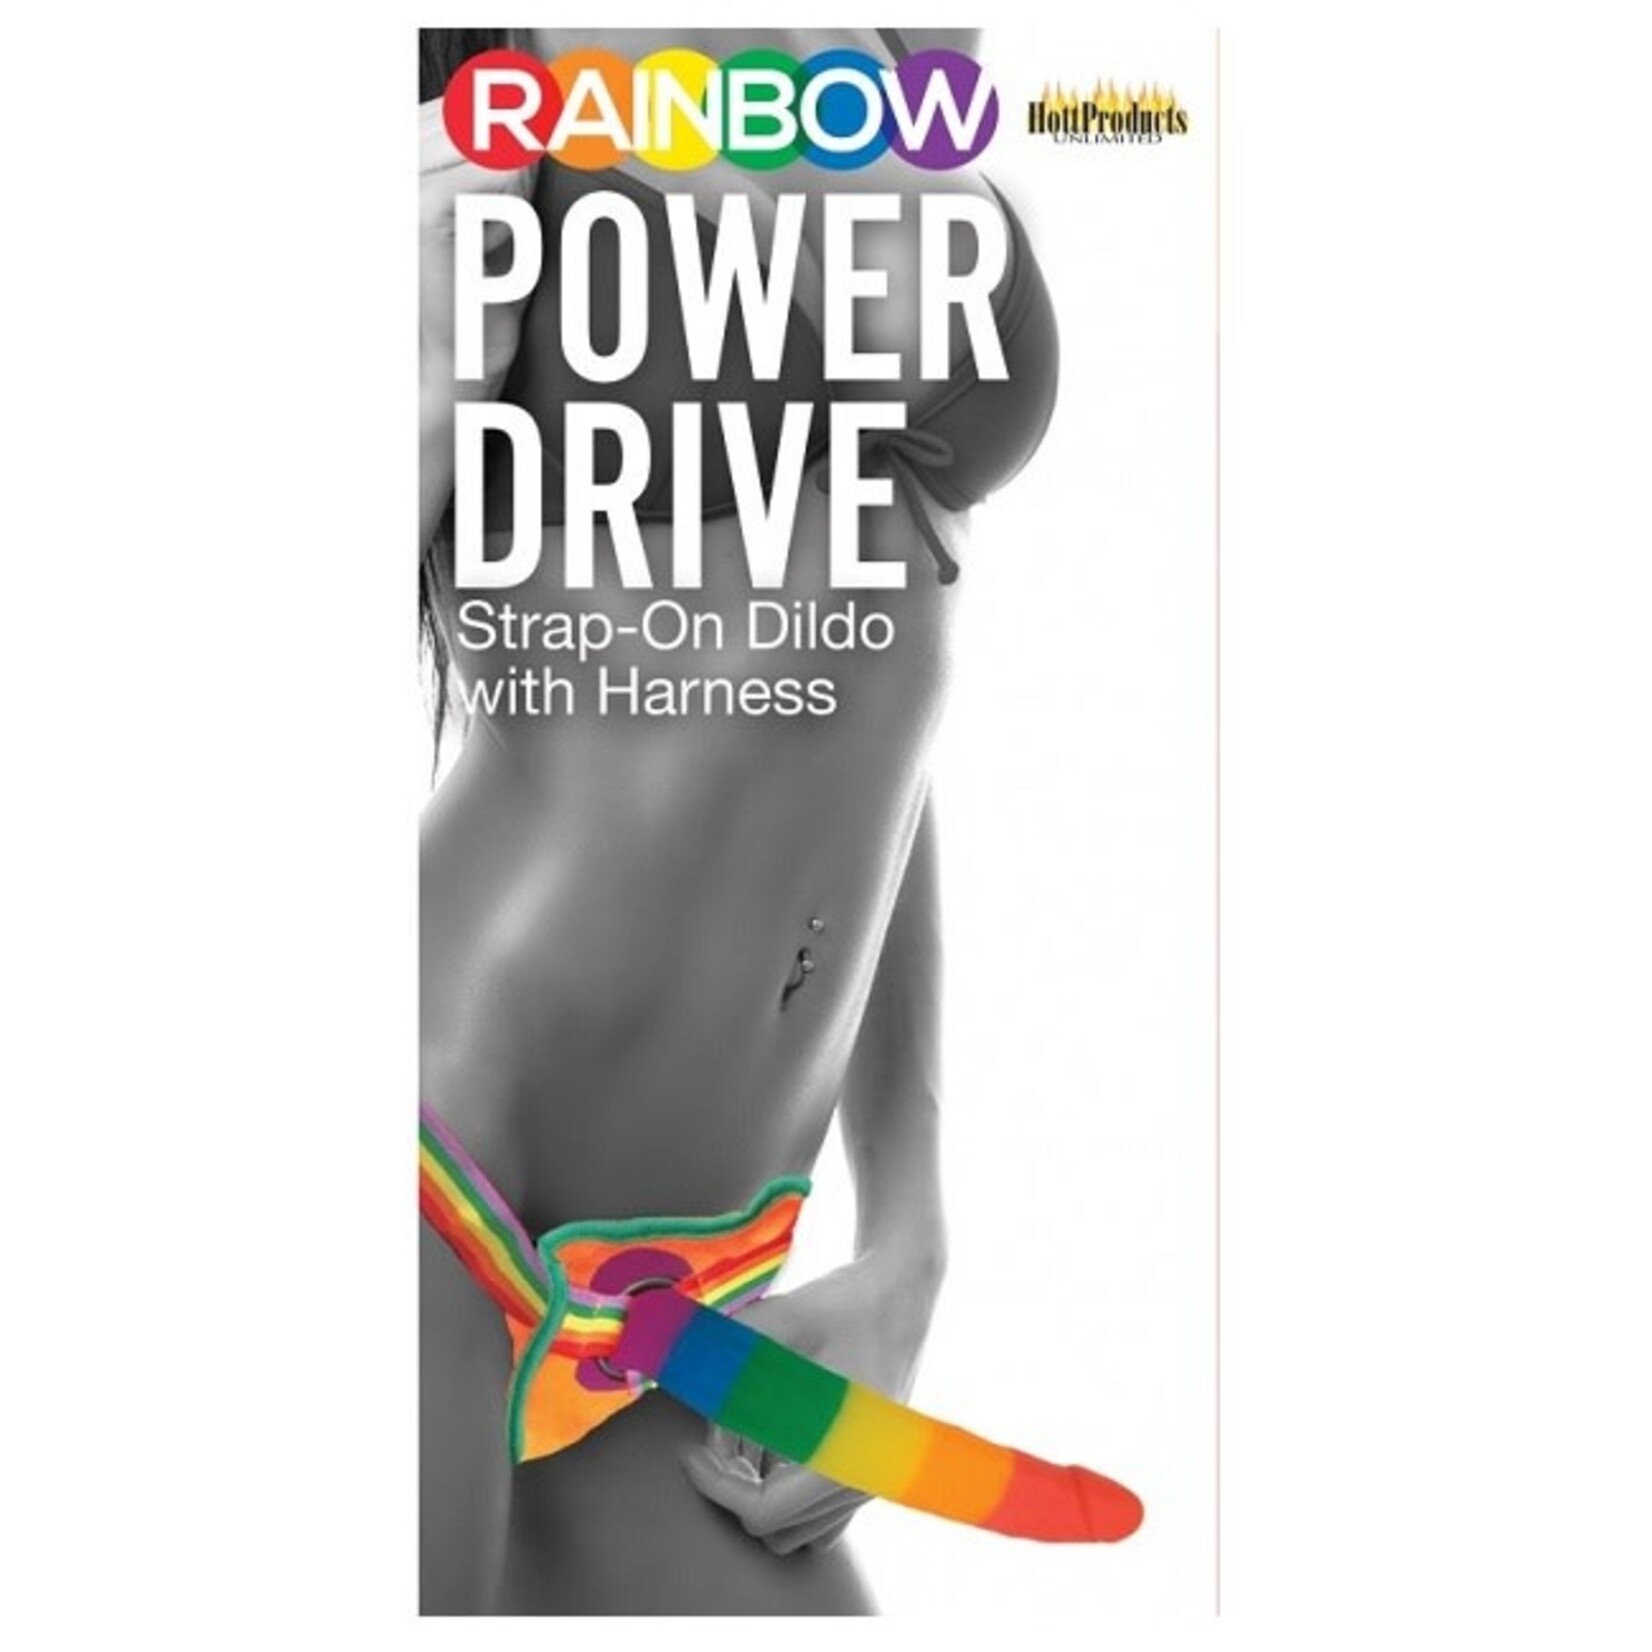 Hott Products Rainbow Power Drive Strap-On Dildo with Harness